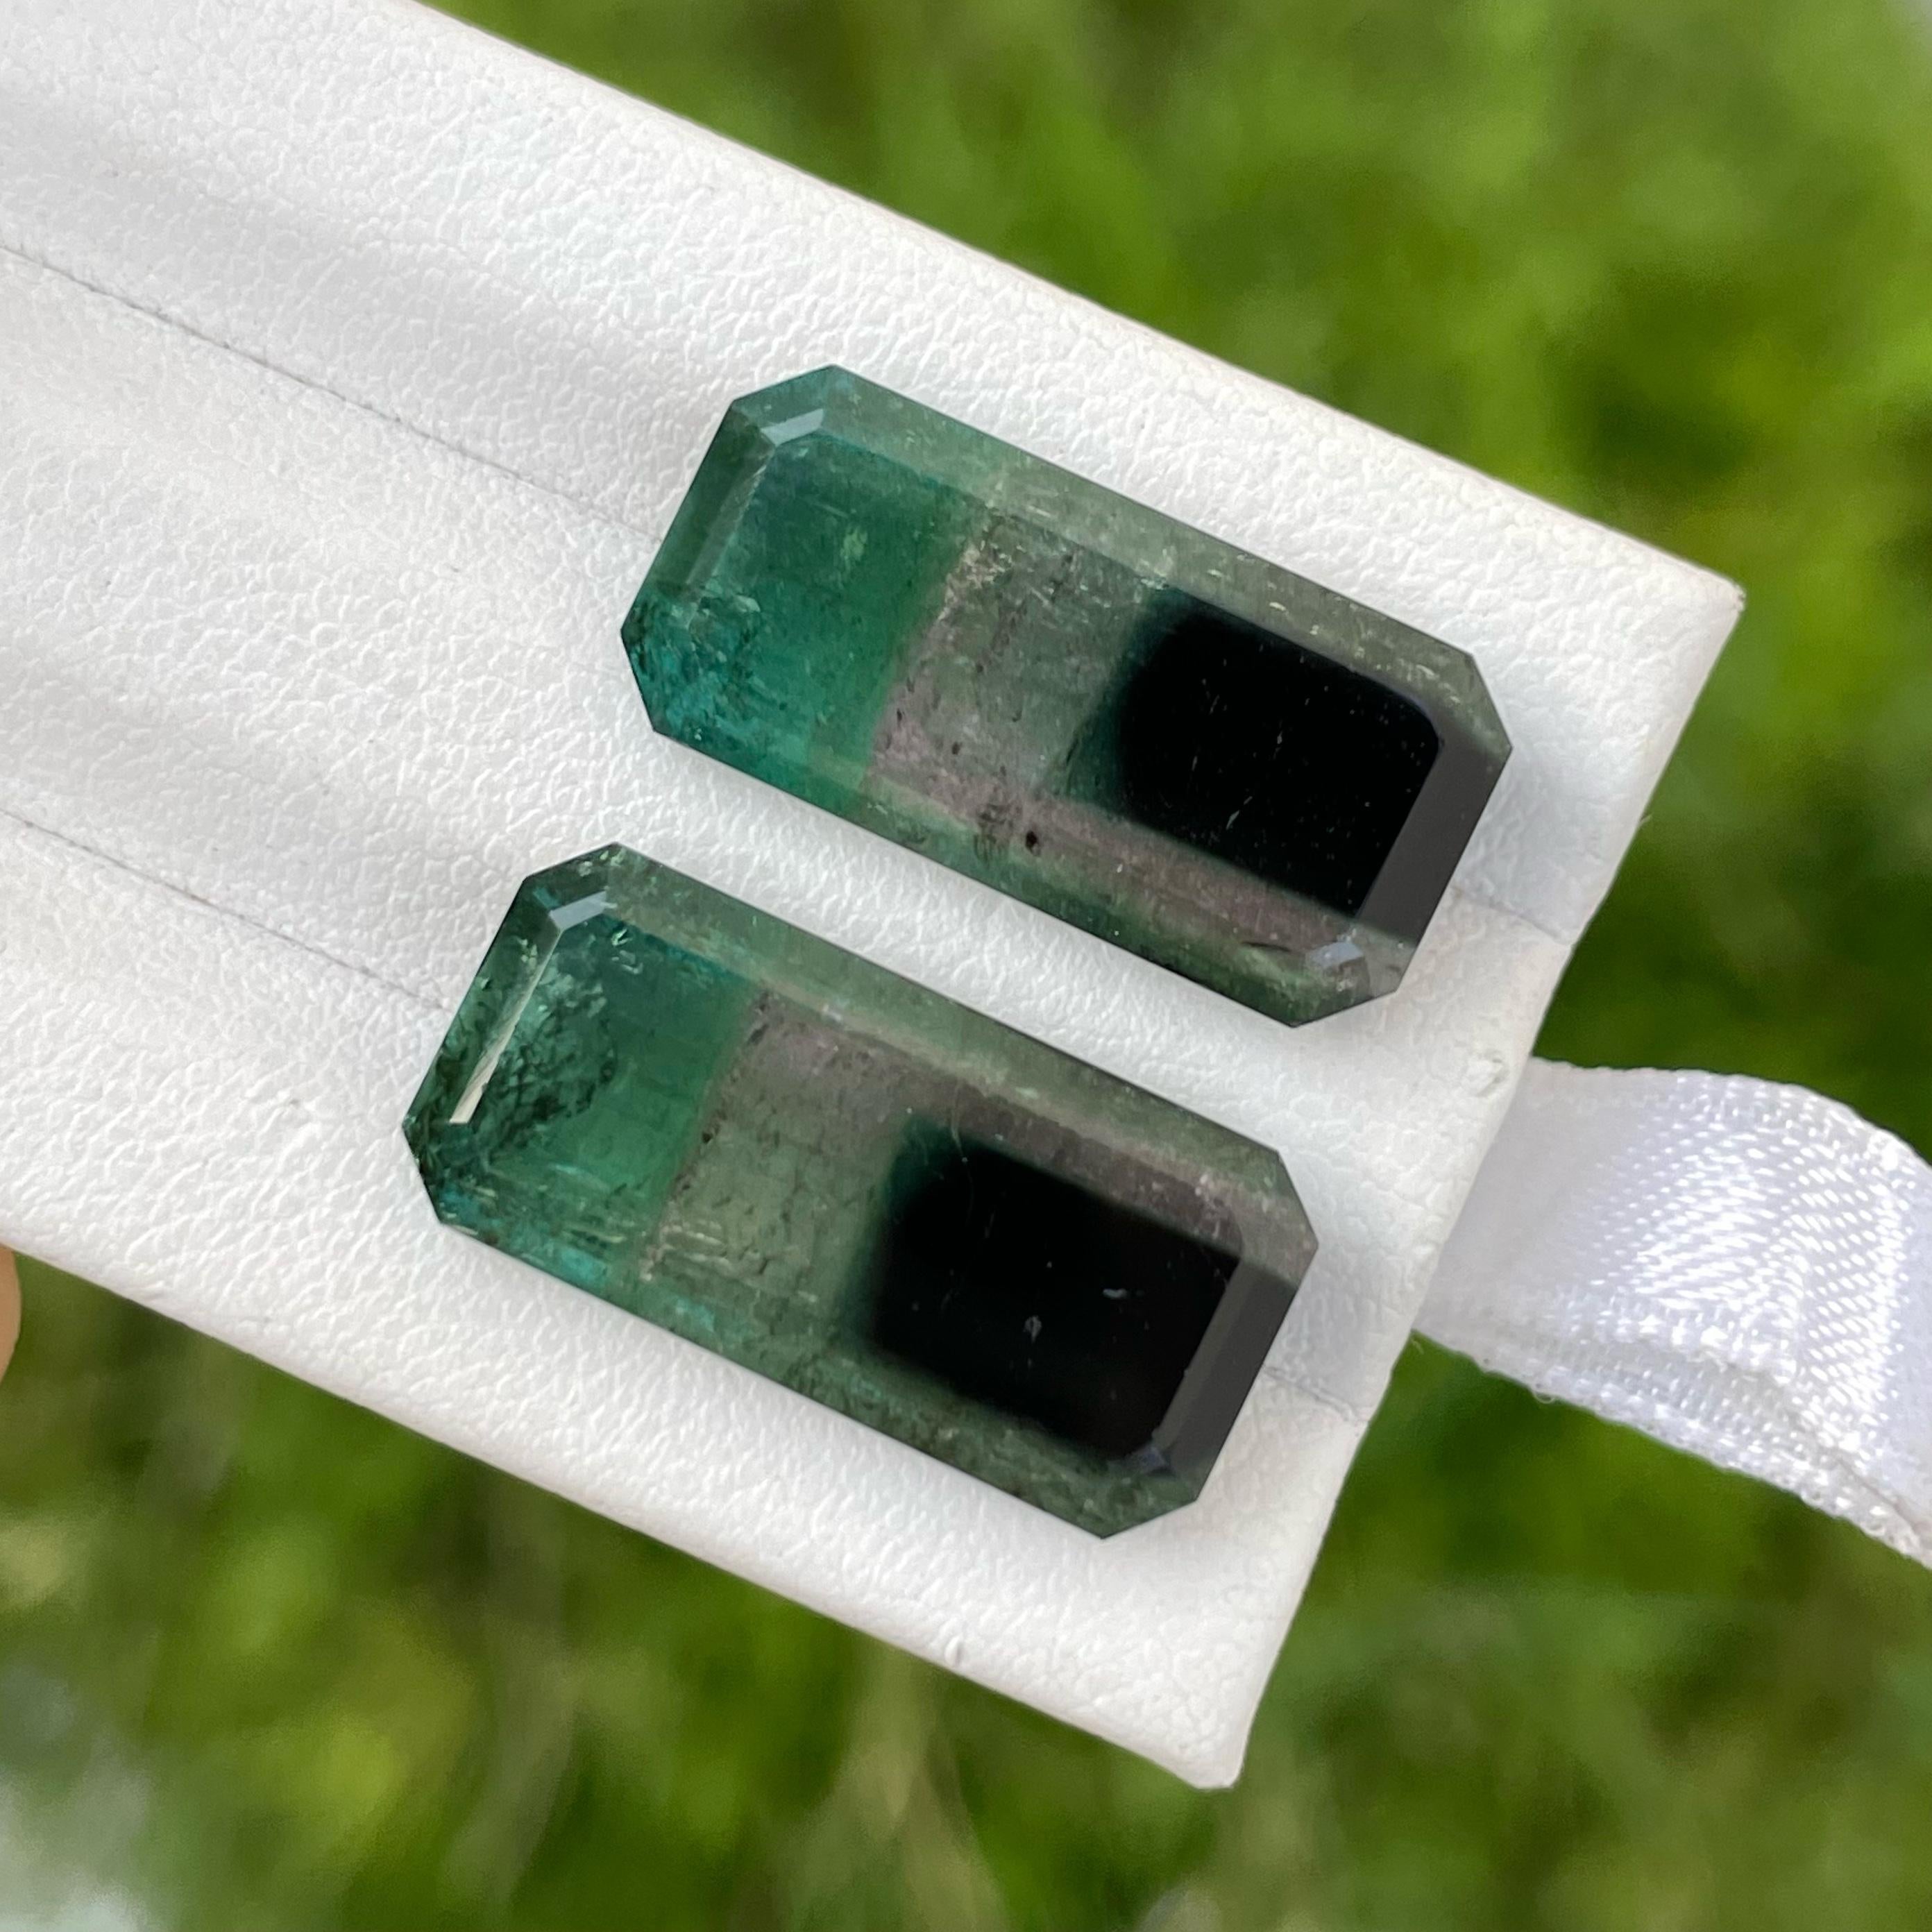 Rare Color Tourmaline Pair Stone, Available For Sale At Wholesale Price Natural High Quality 22.70 Carats Loose Tourmaline From Afghanistan.
Product Information
GEMSTONE TYPE	Rare Color Tourmaline Pair Stone
WEIGHT	22.70 Carats
DIMENSIONS	 21.0 x